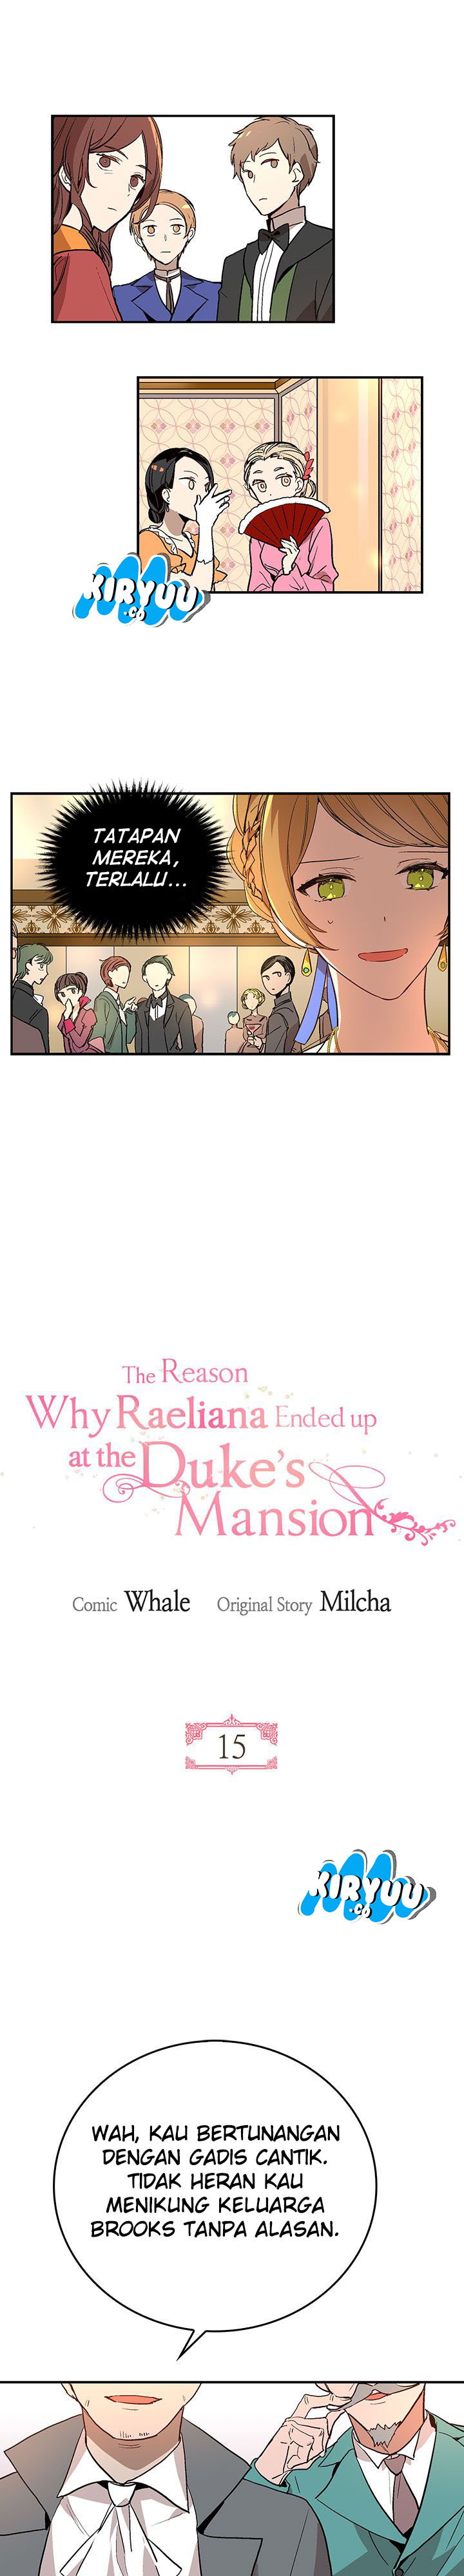 The Reason Why Raeliana Ended up at the Duke’s Mansion Chapter 15